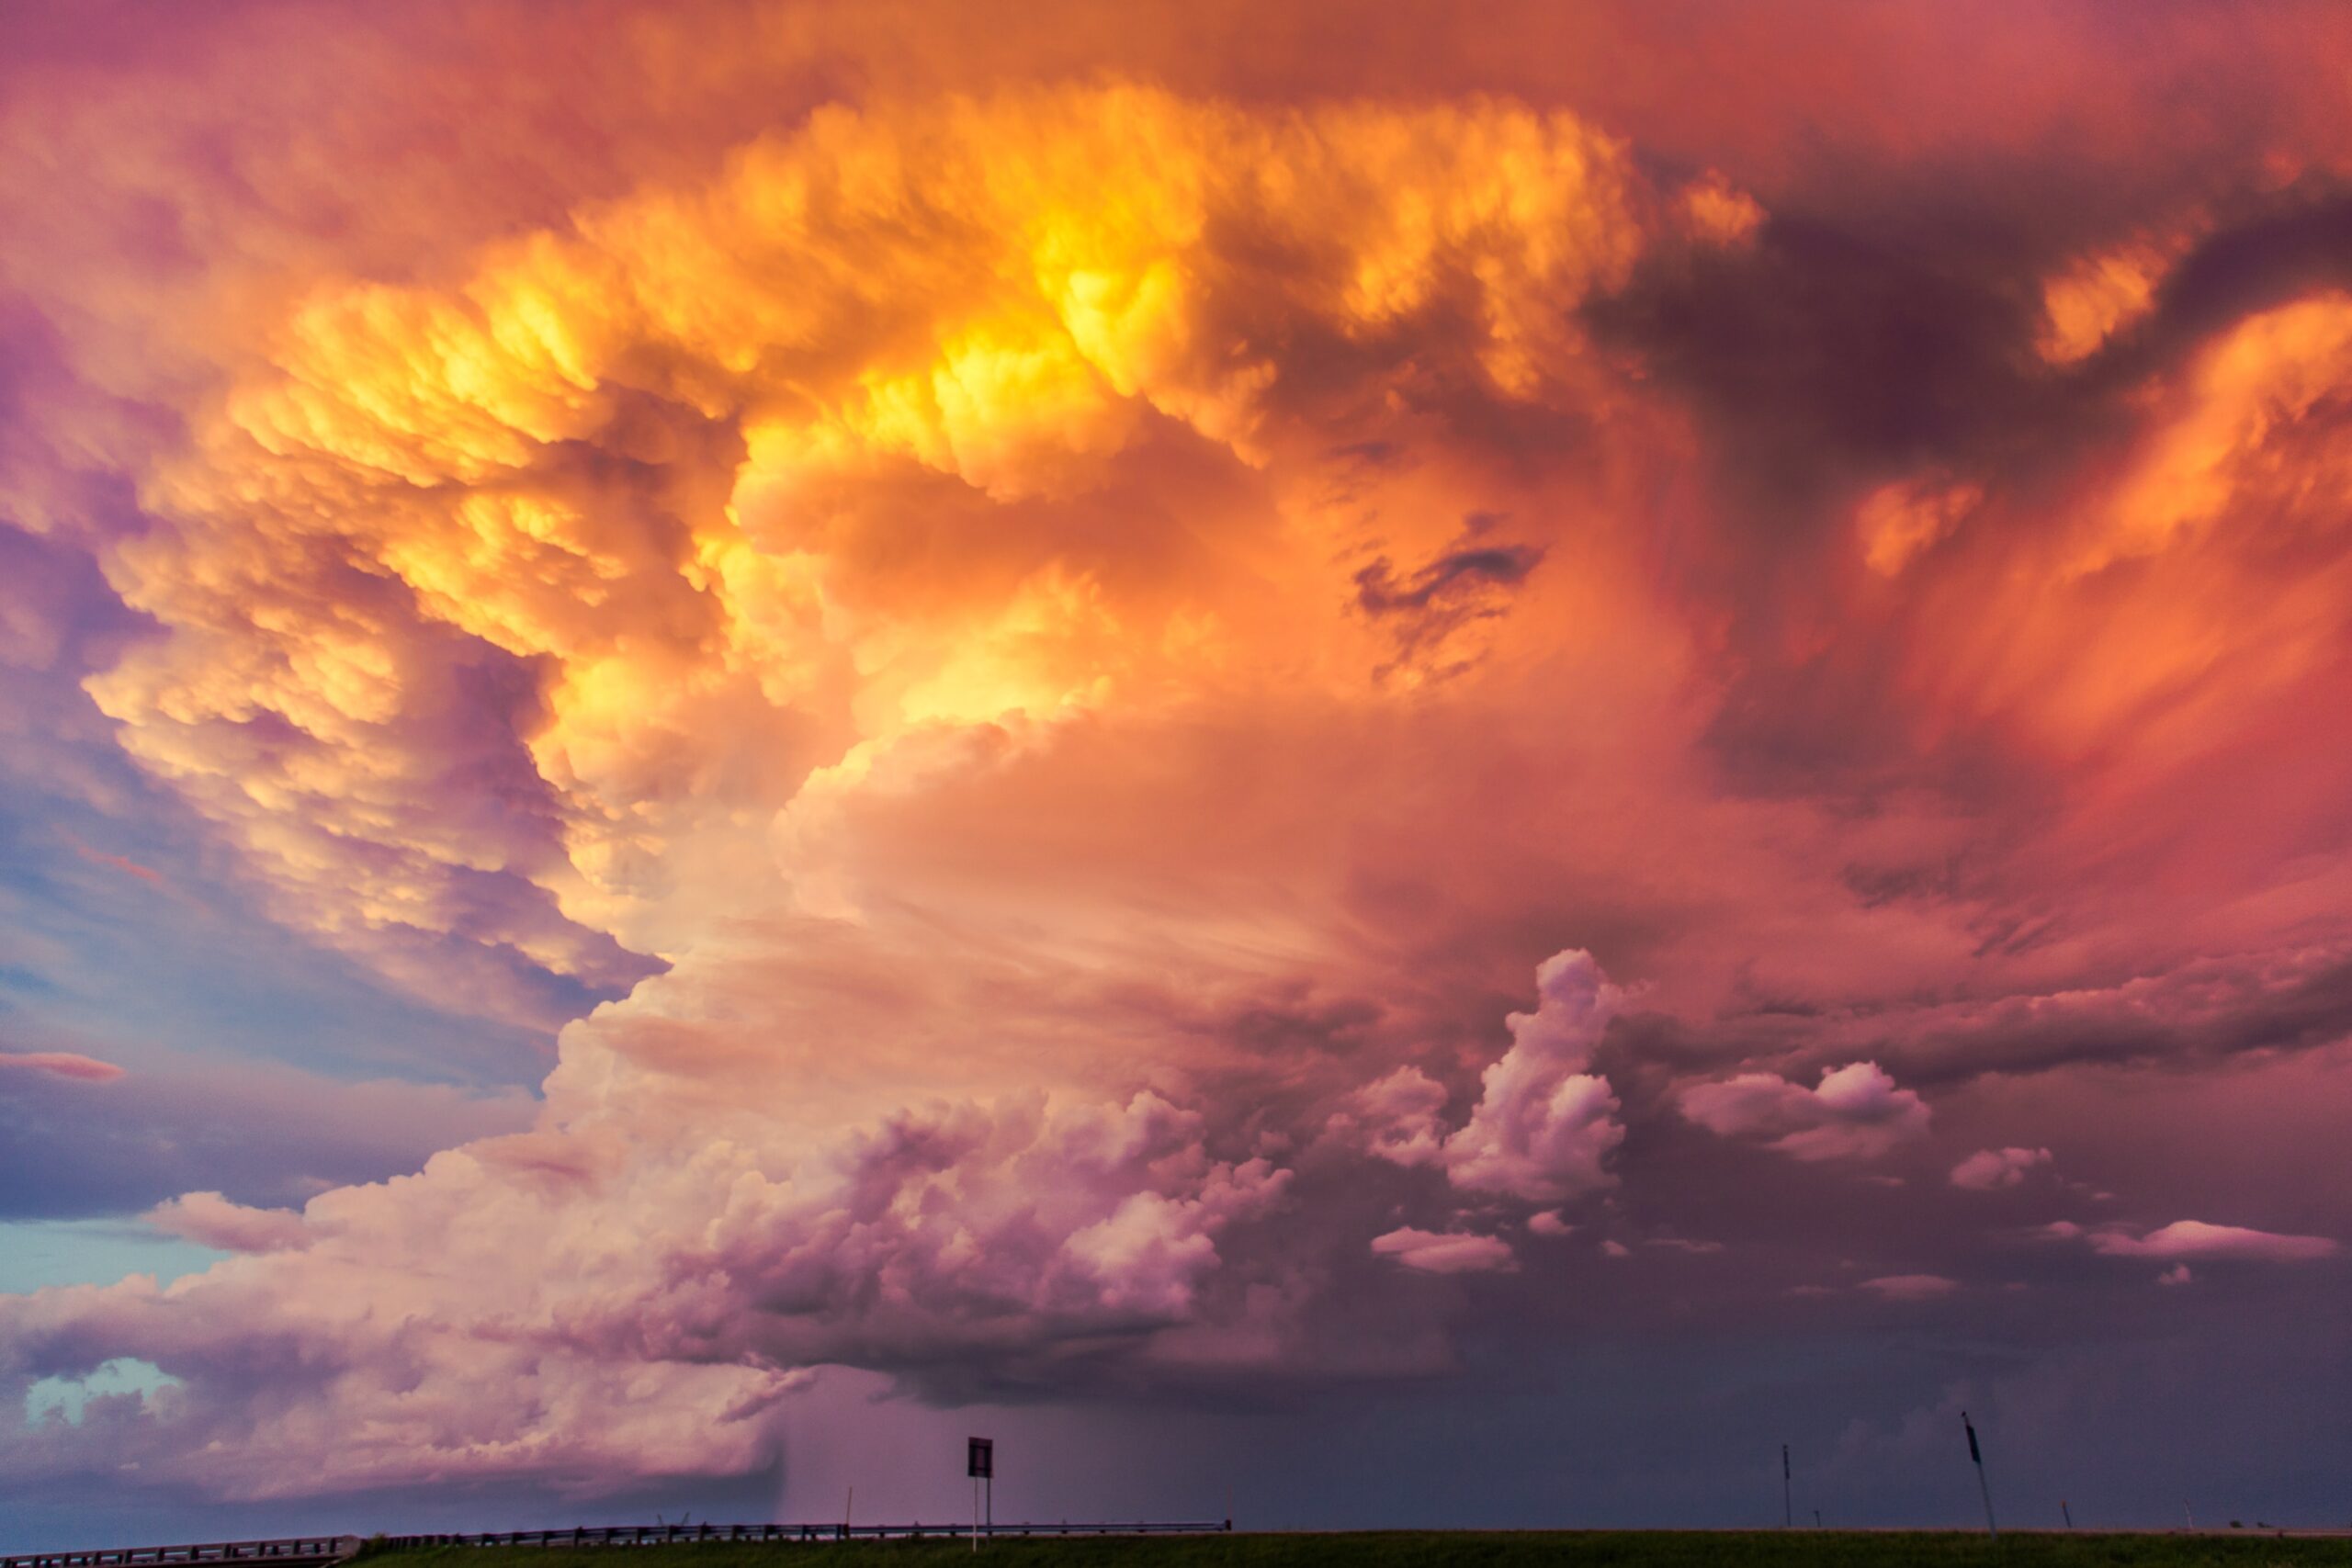 A photograph of a supercell thunderstorm